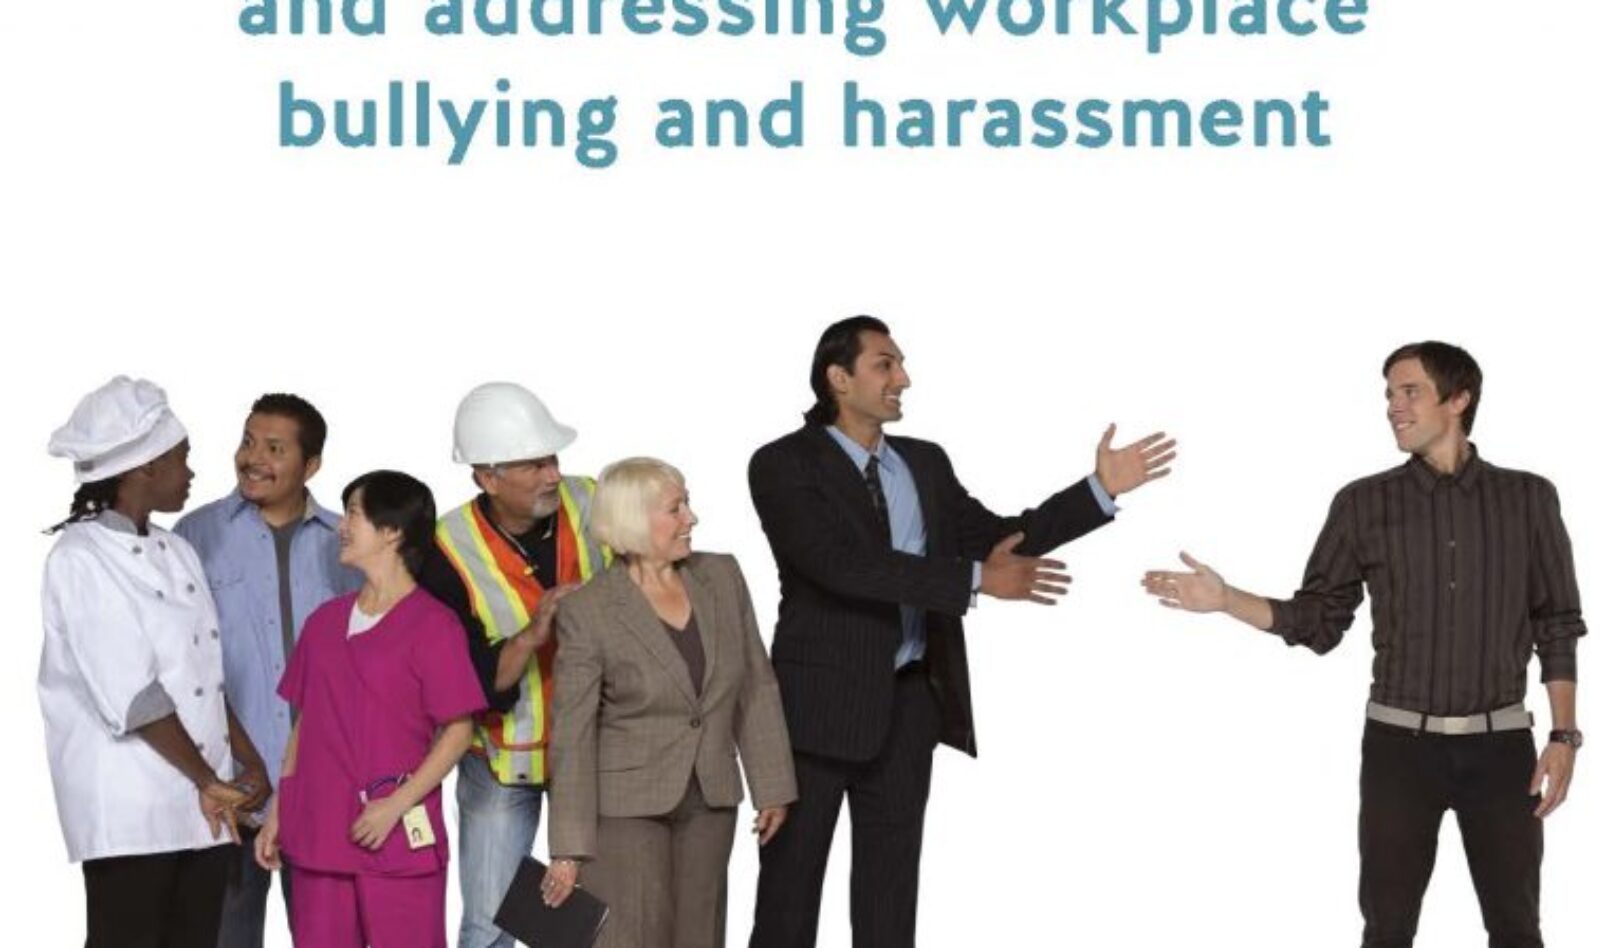 Toward a Respectful Workplace: Preventing and Addressing Workplace Bullying and Harassment